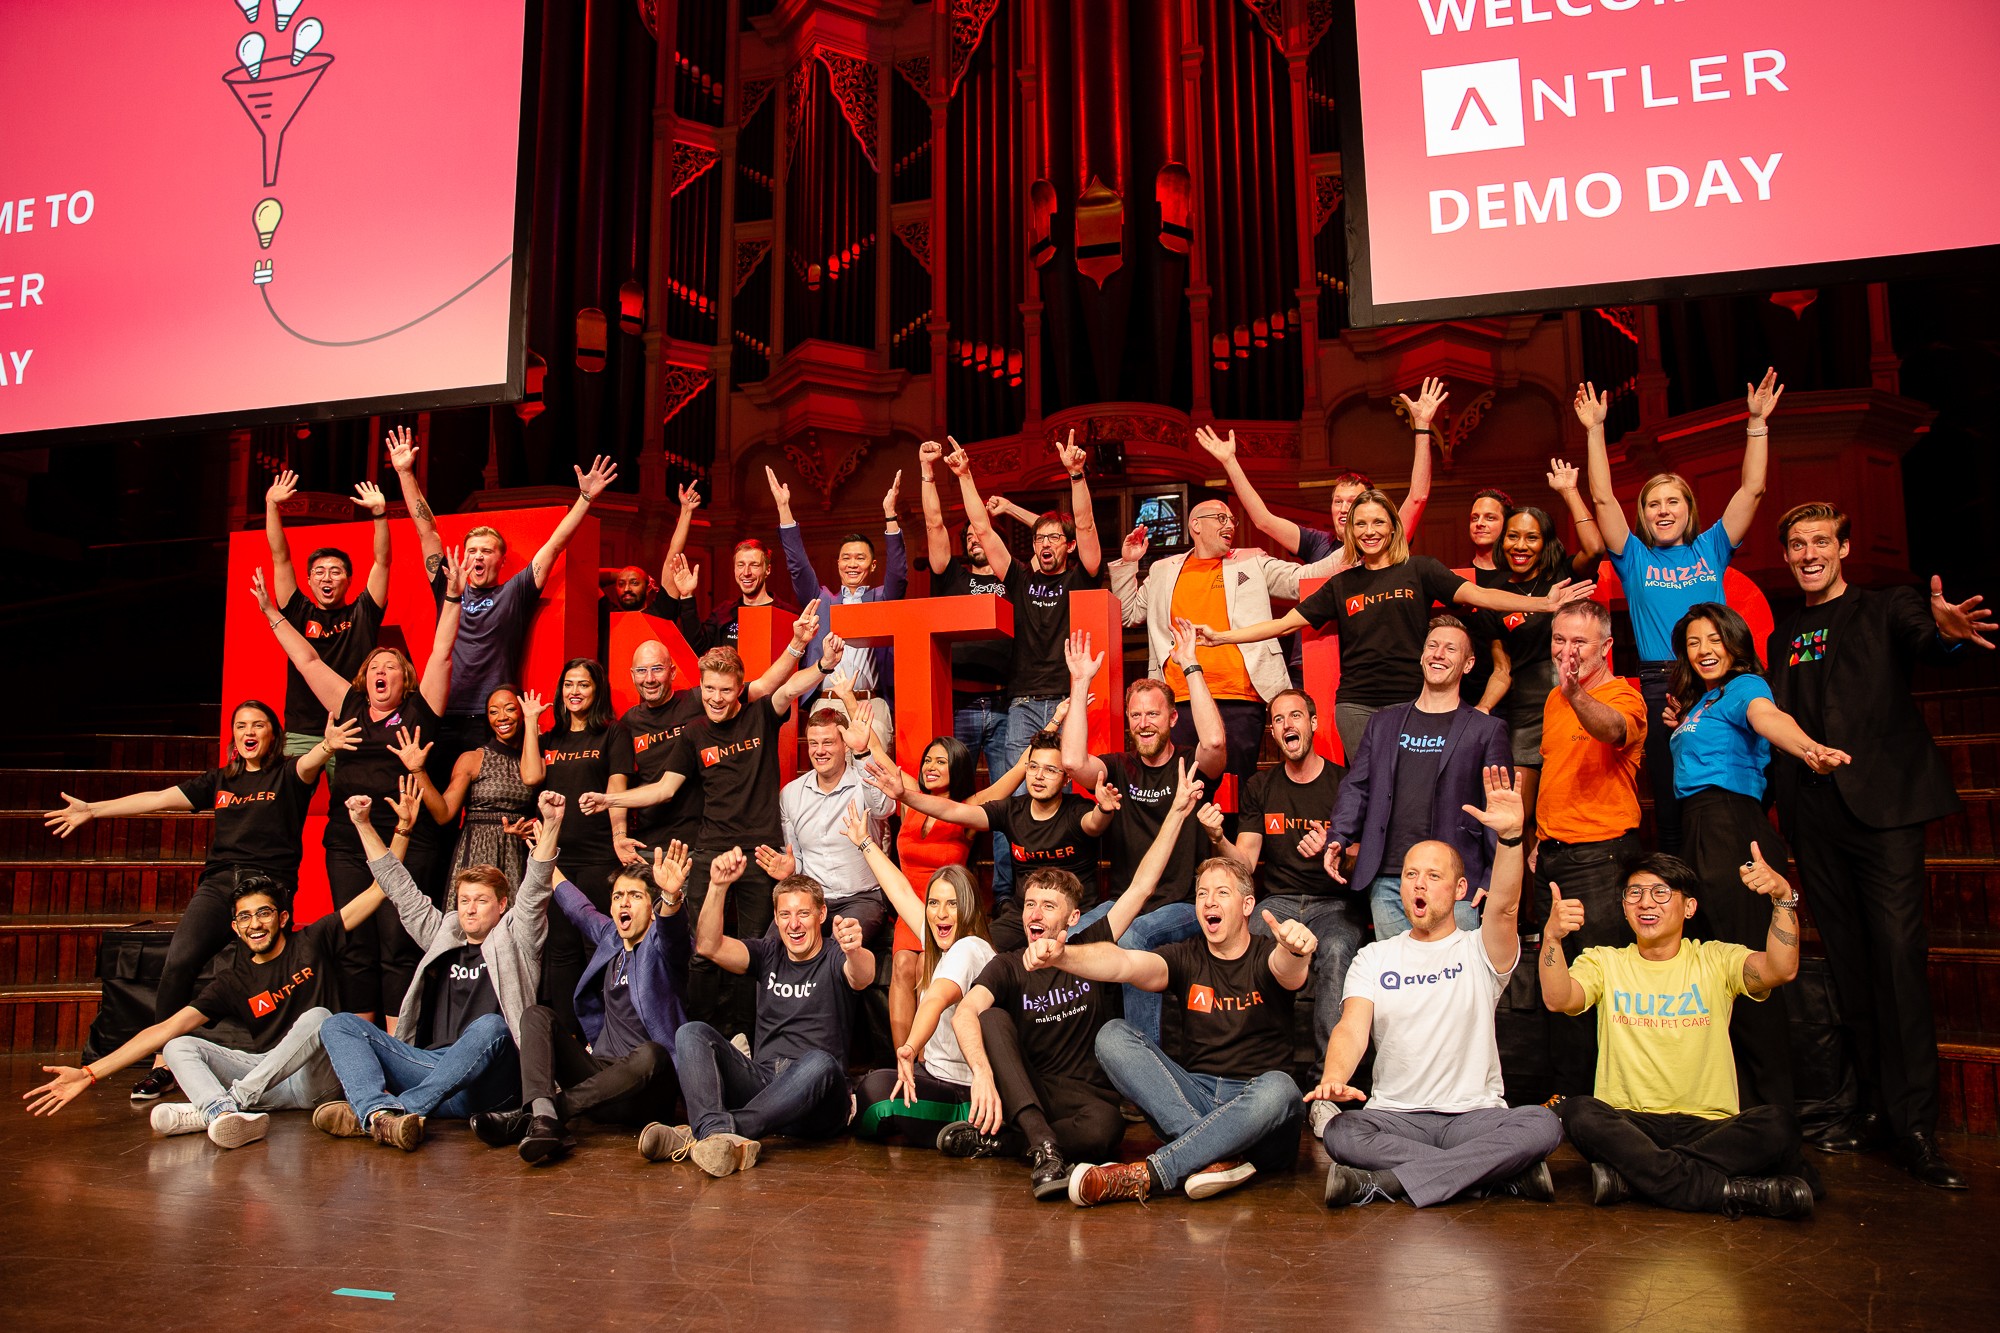 An image of a group of founders and Antler VC employees on stage at the firm's demo day